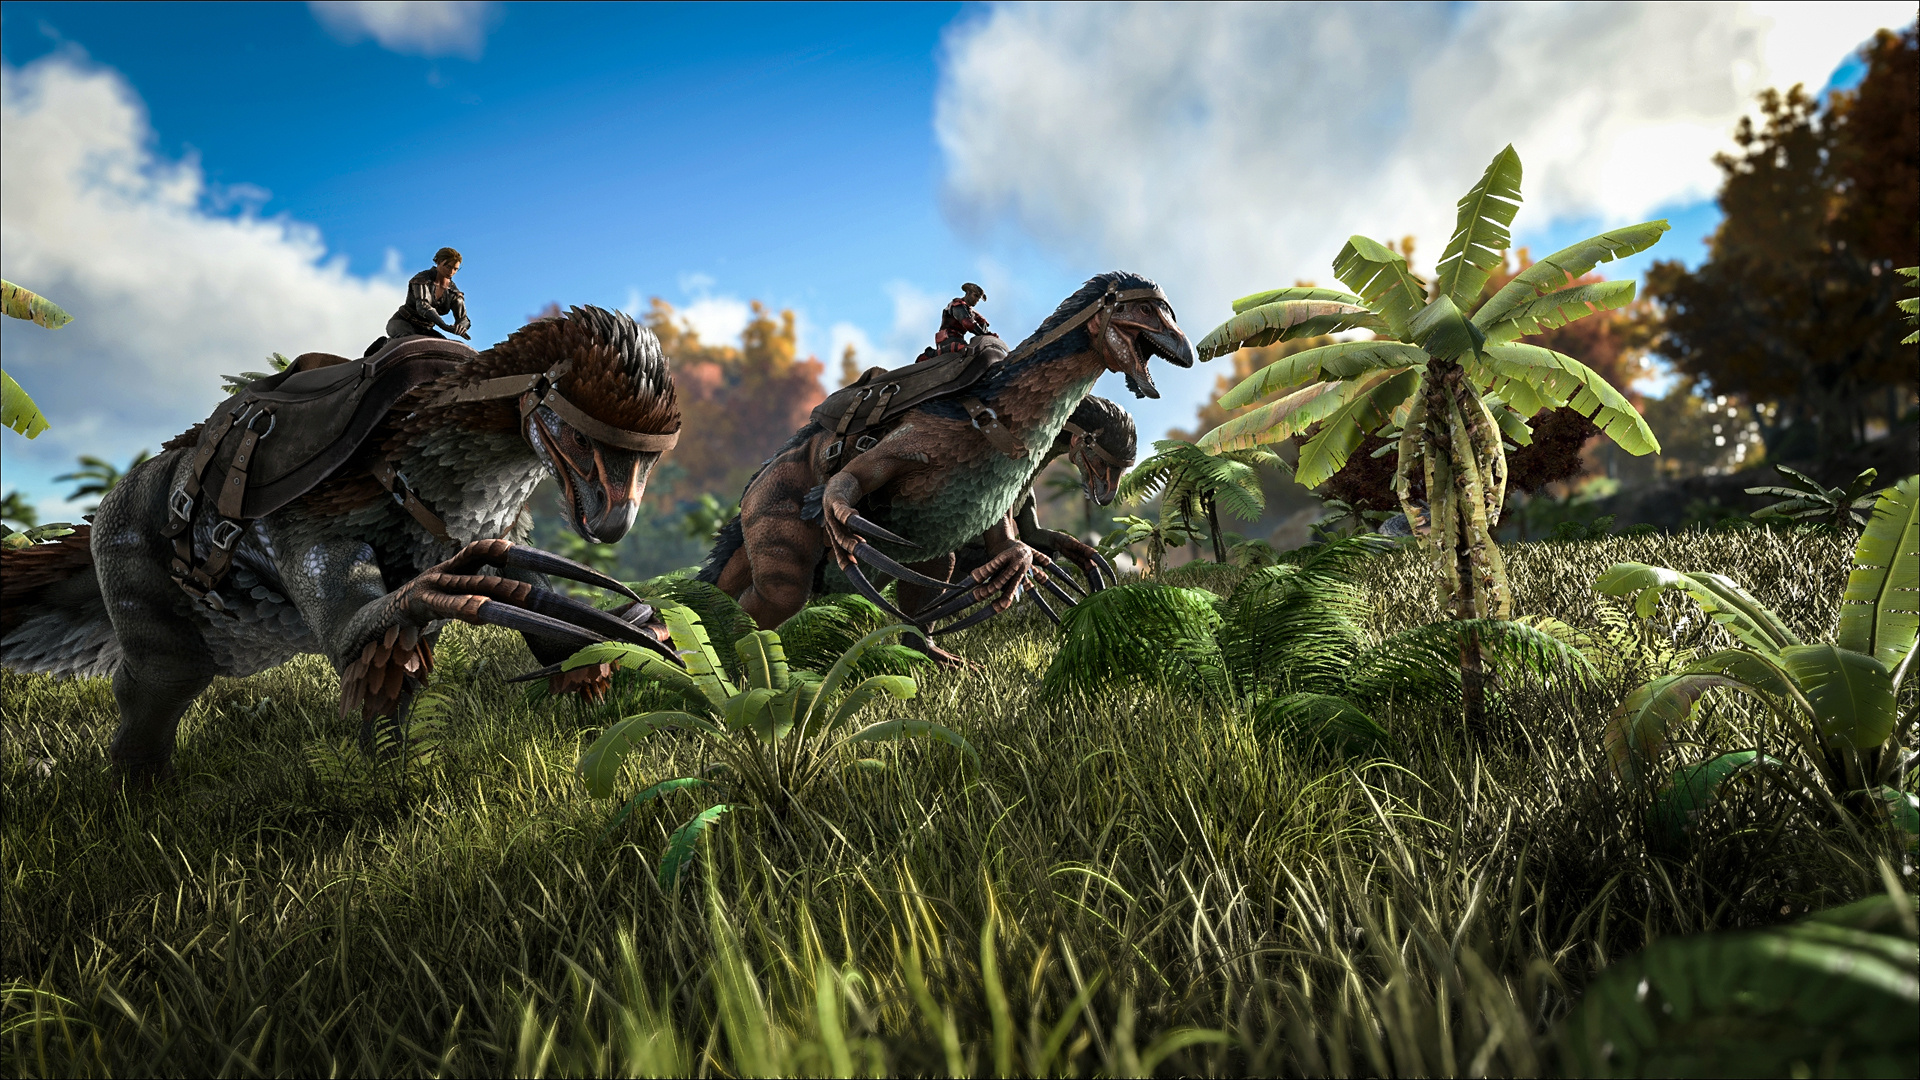 ARK: Survival Evolved: Genesis Part 2, The fifth and final paid DLC expansion. 1920x1080 Full HD Wallpaper.